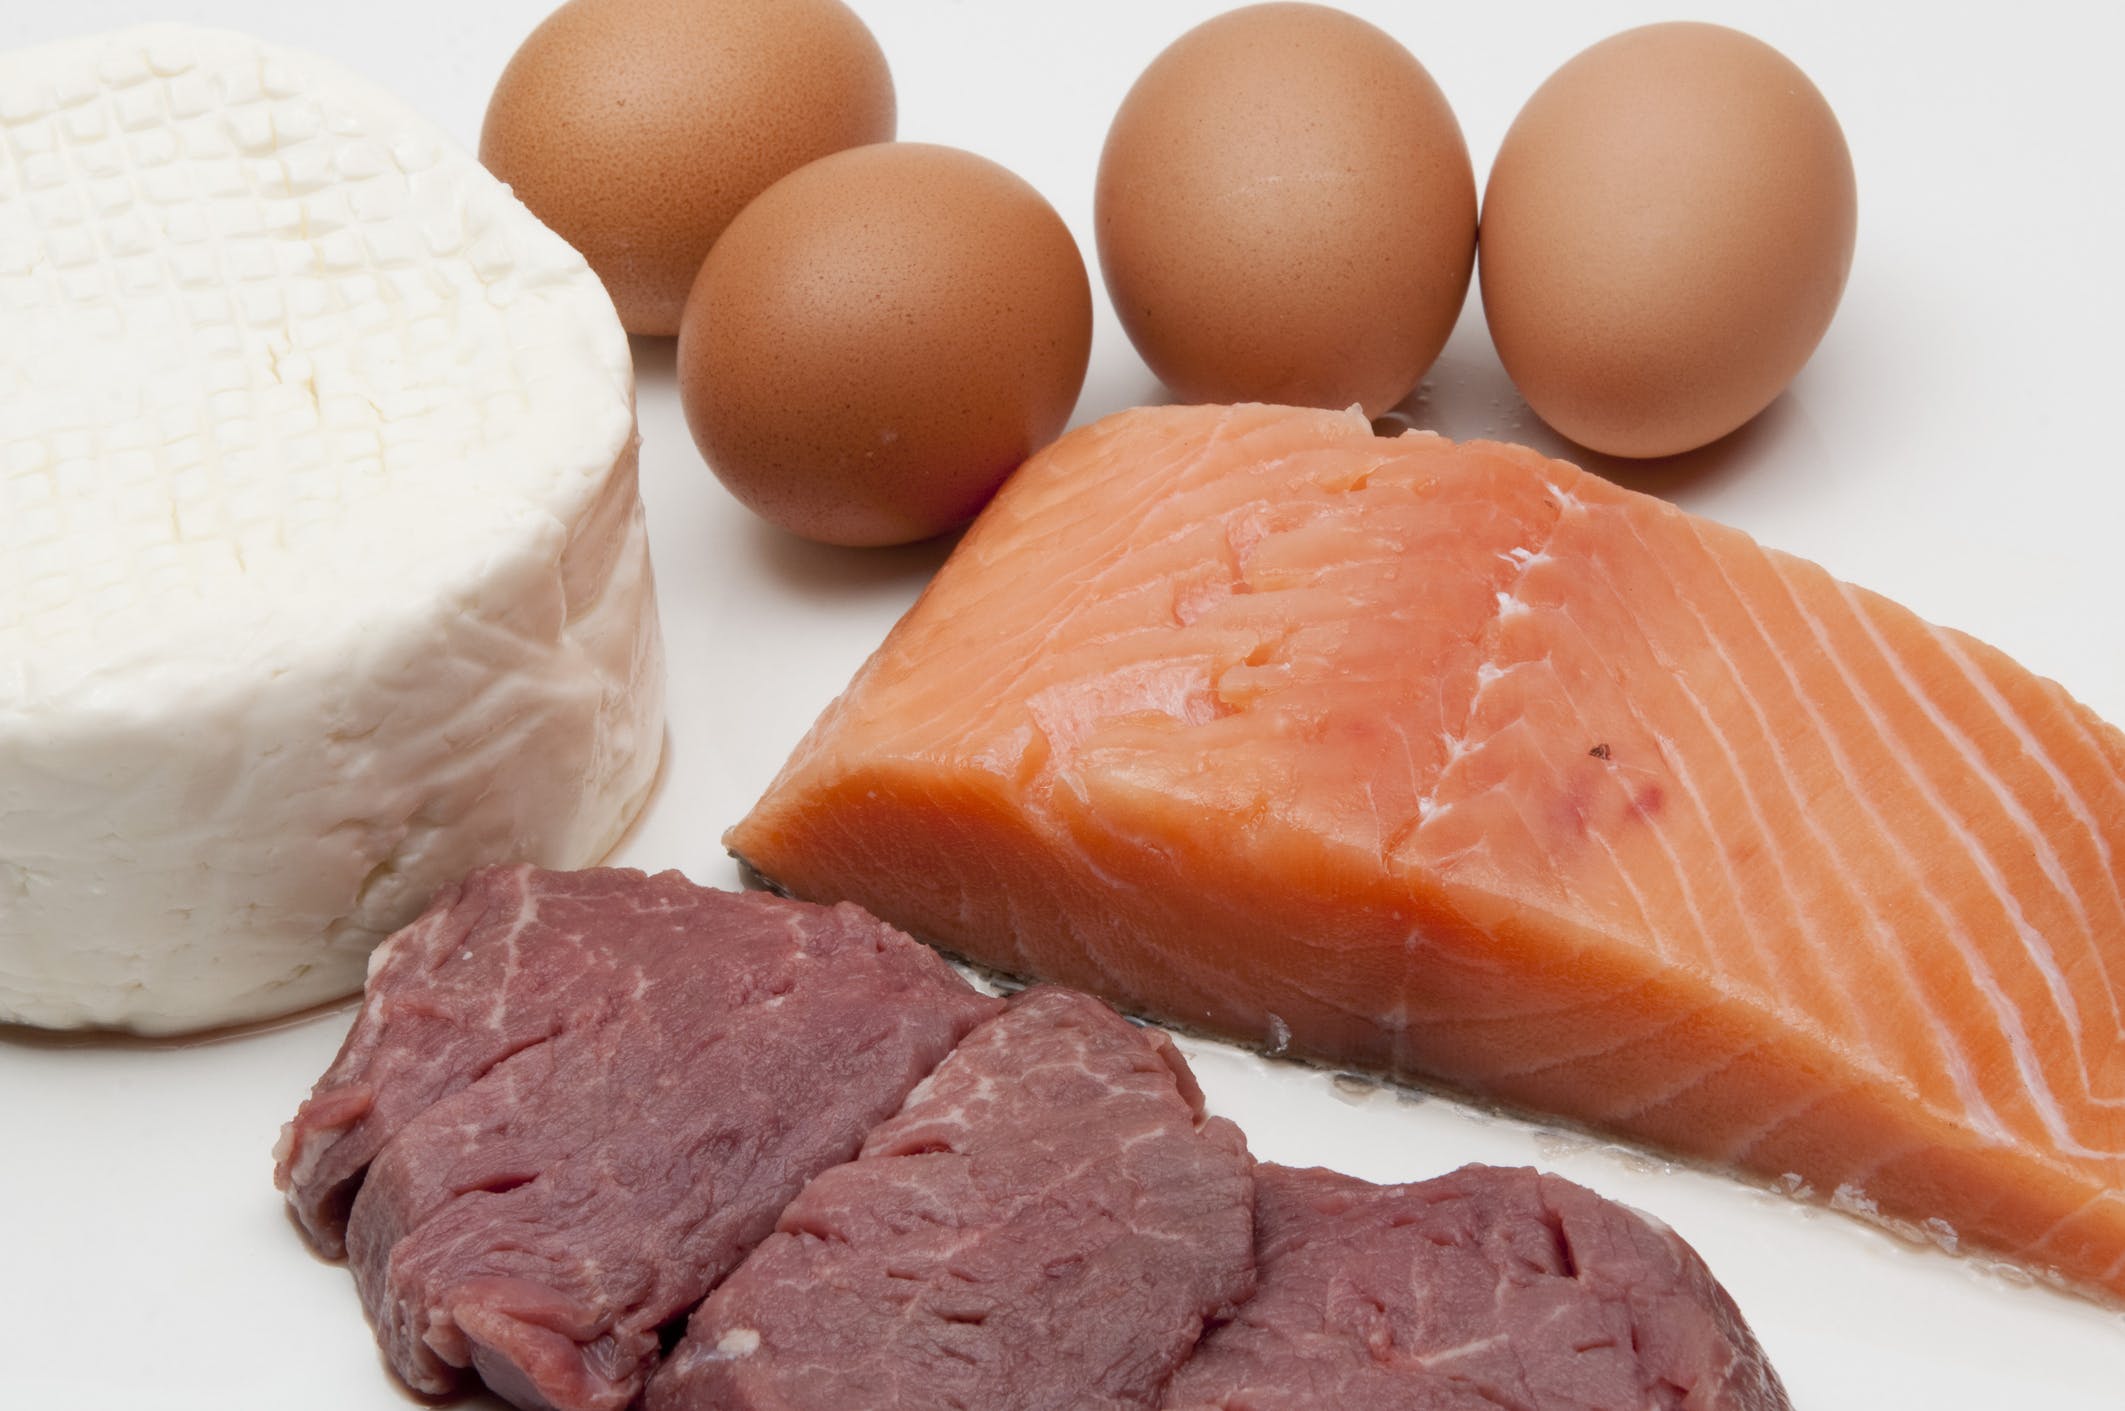 How Protein Can Help You Lose Weight